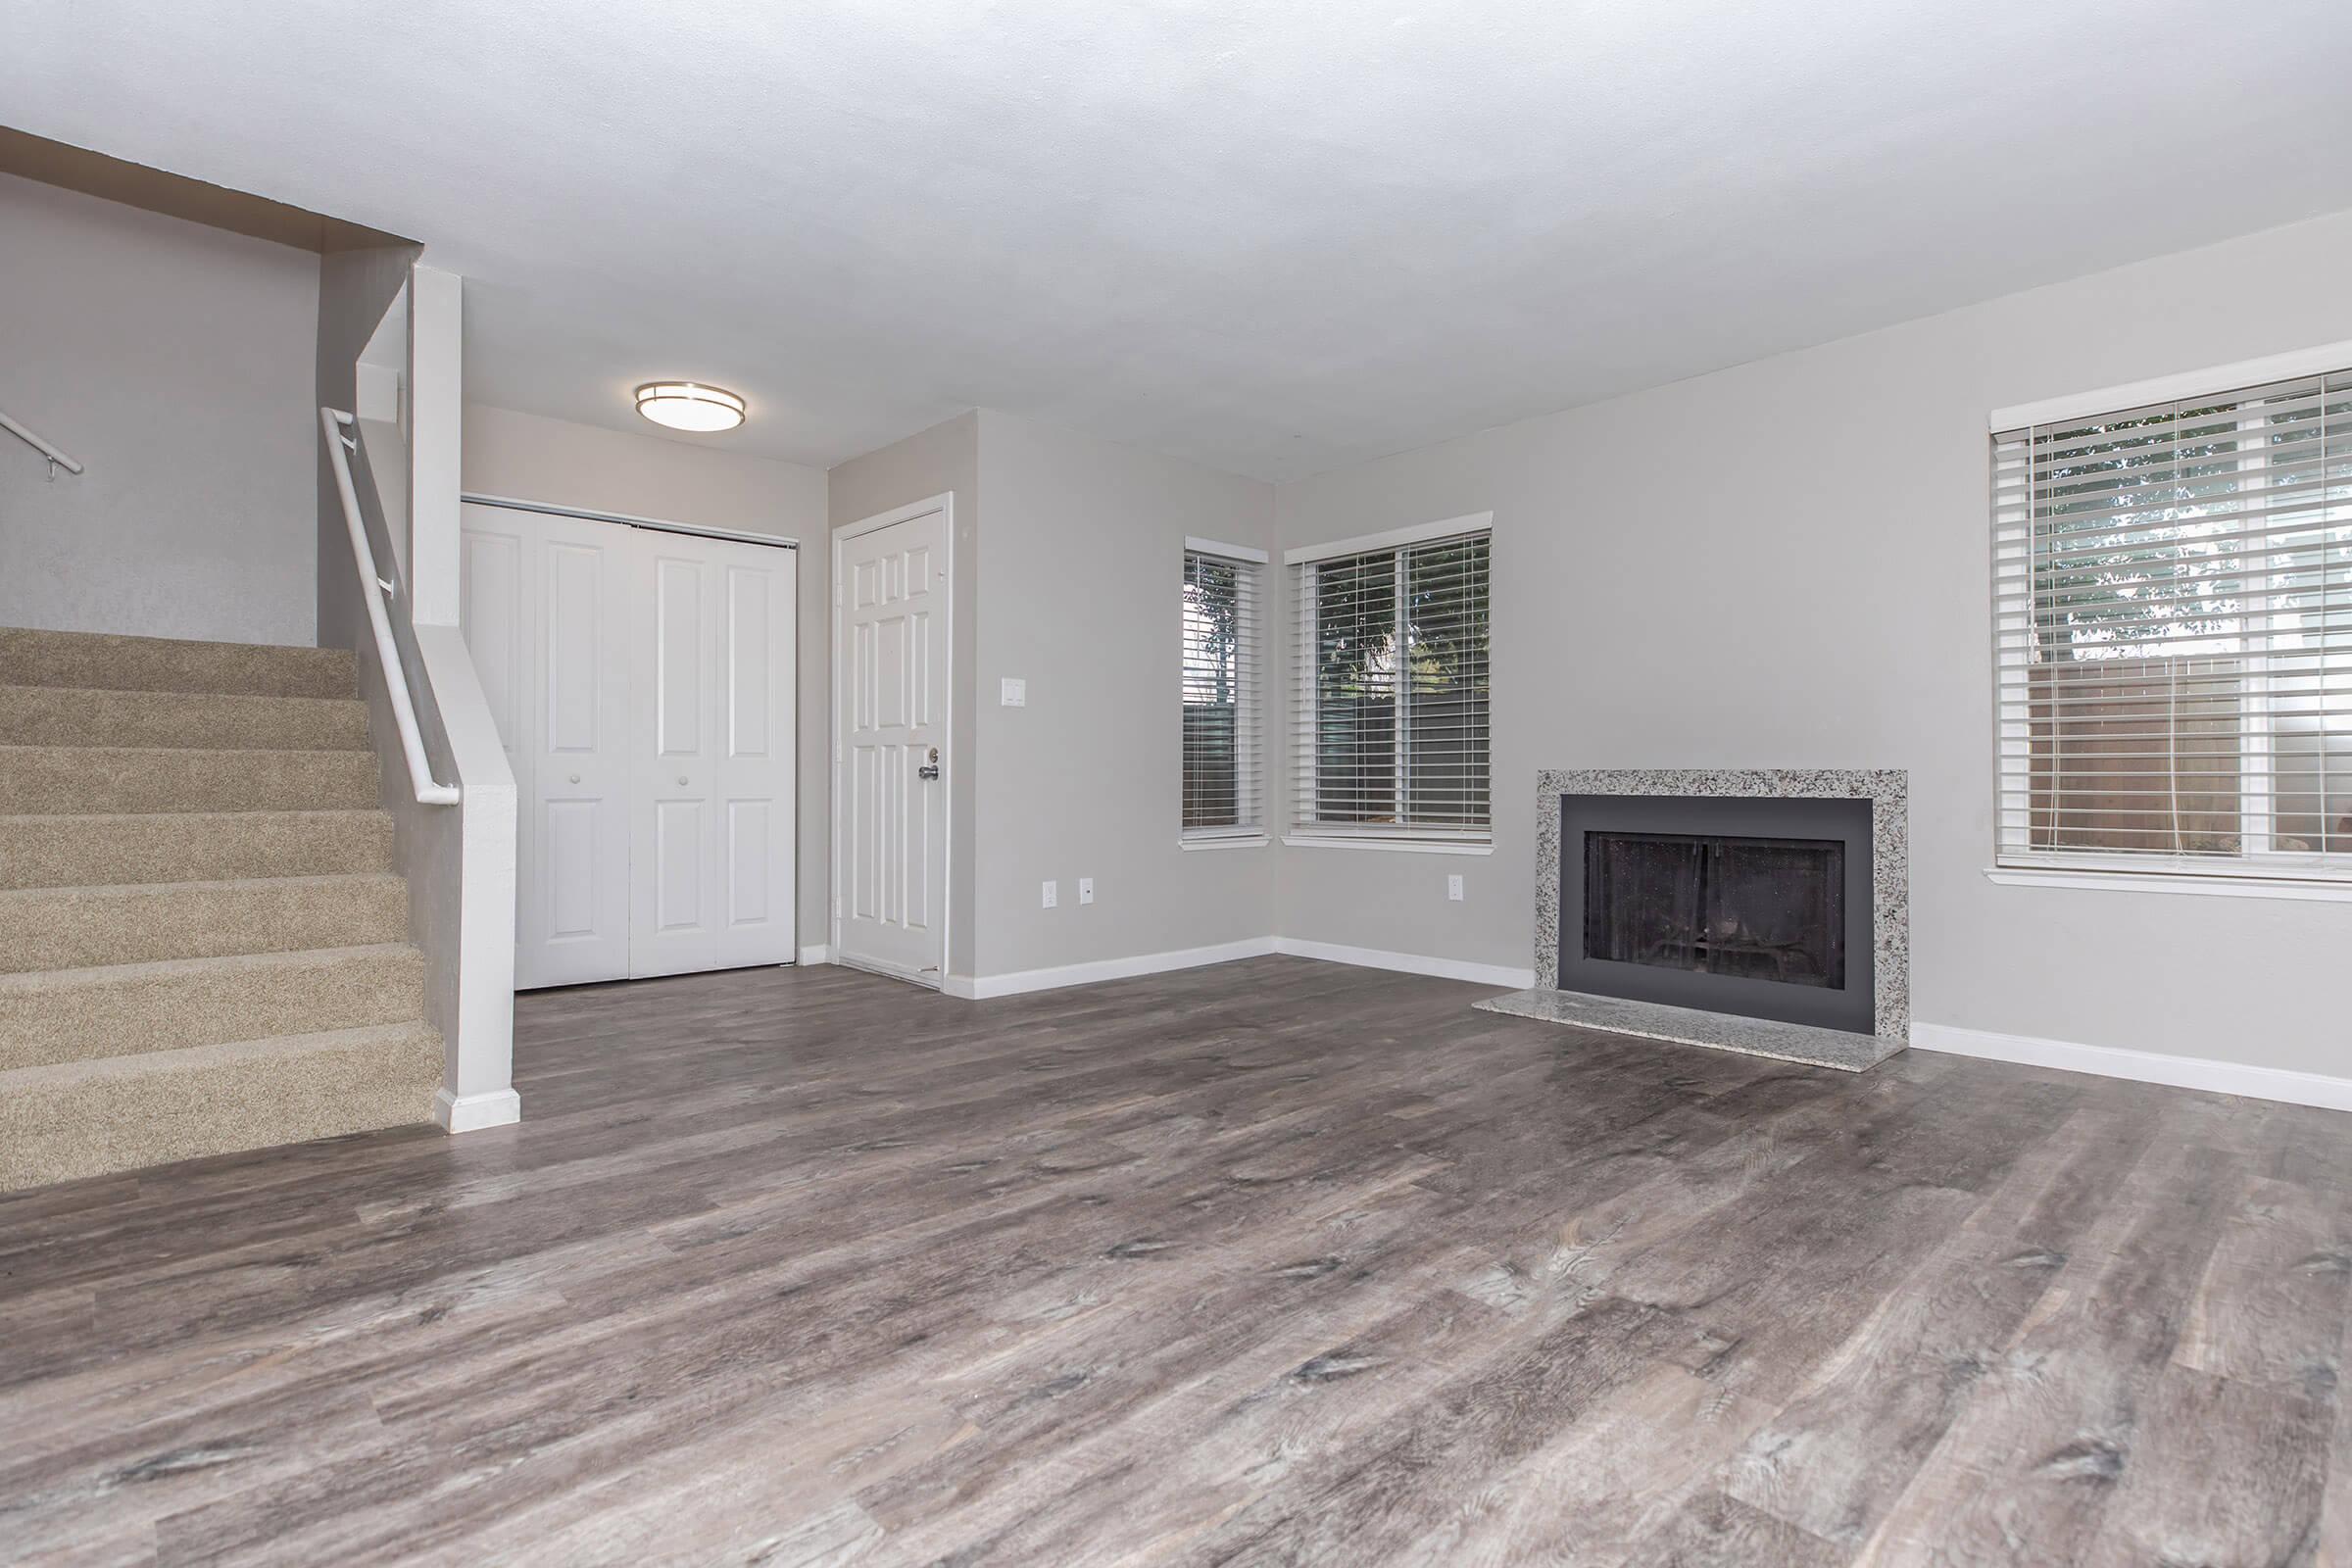 YOUR 3 BEDROOM TOWNHOME IN SACRAMENTO, CA